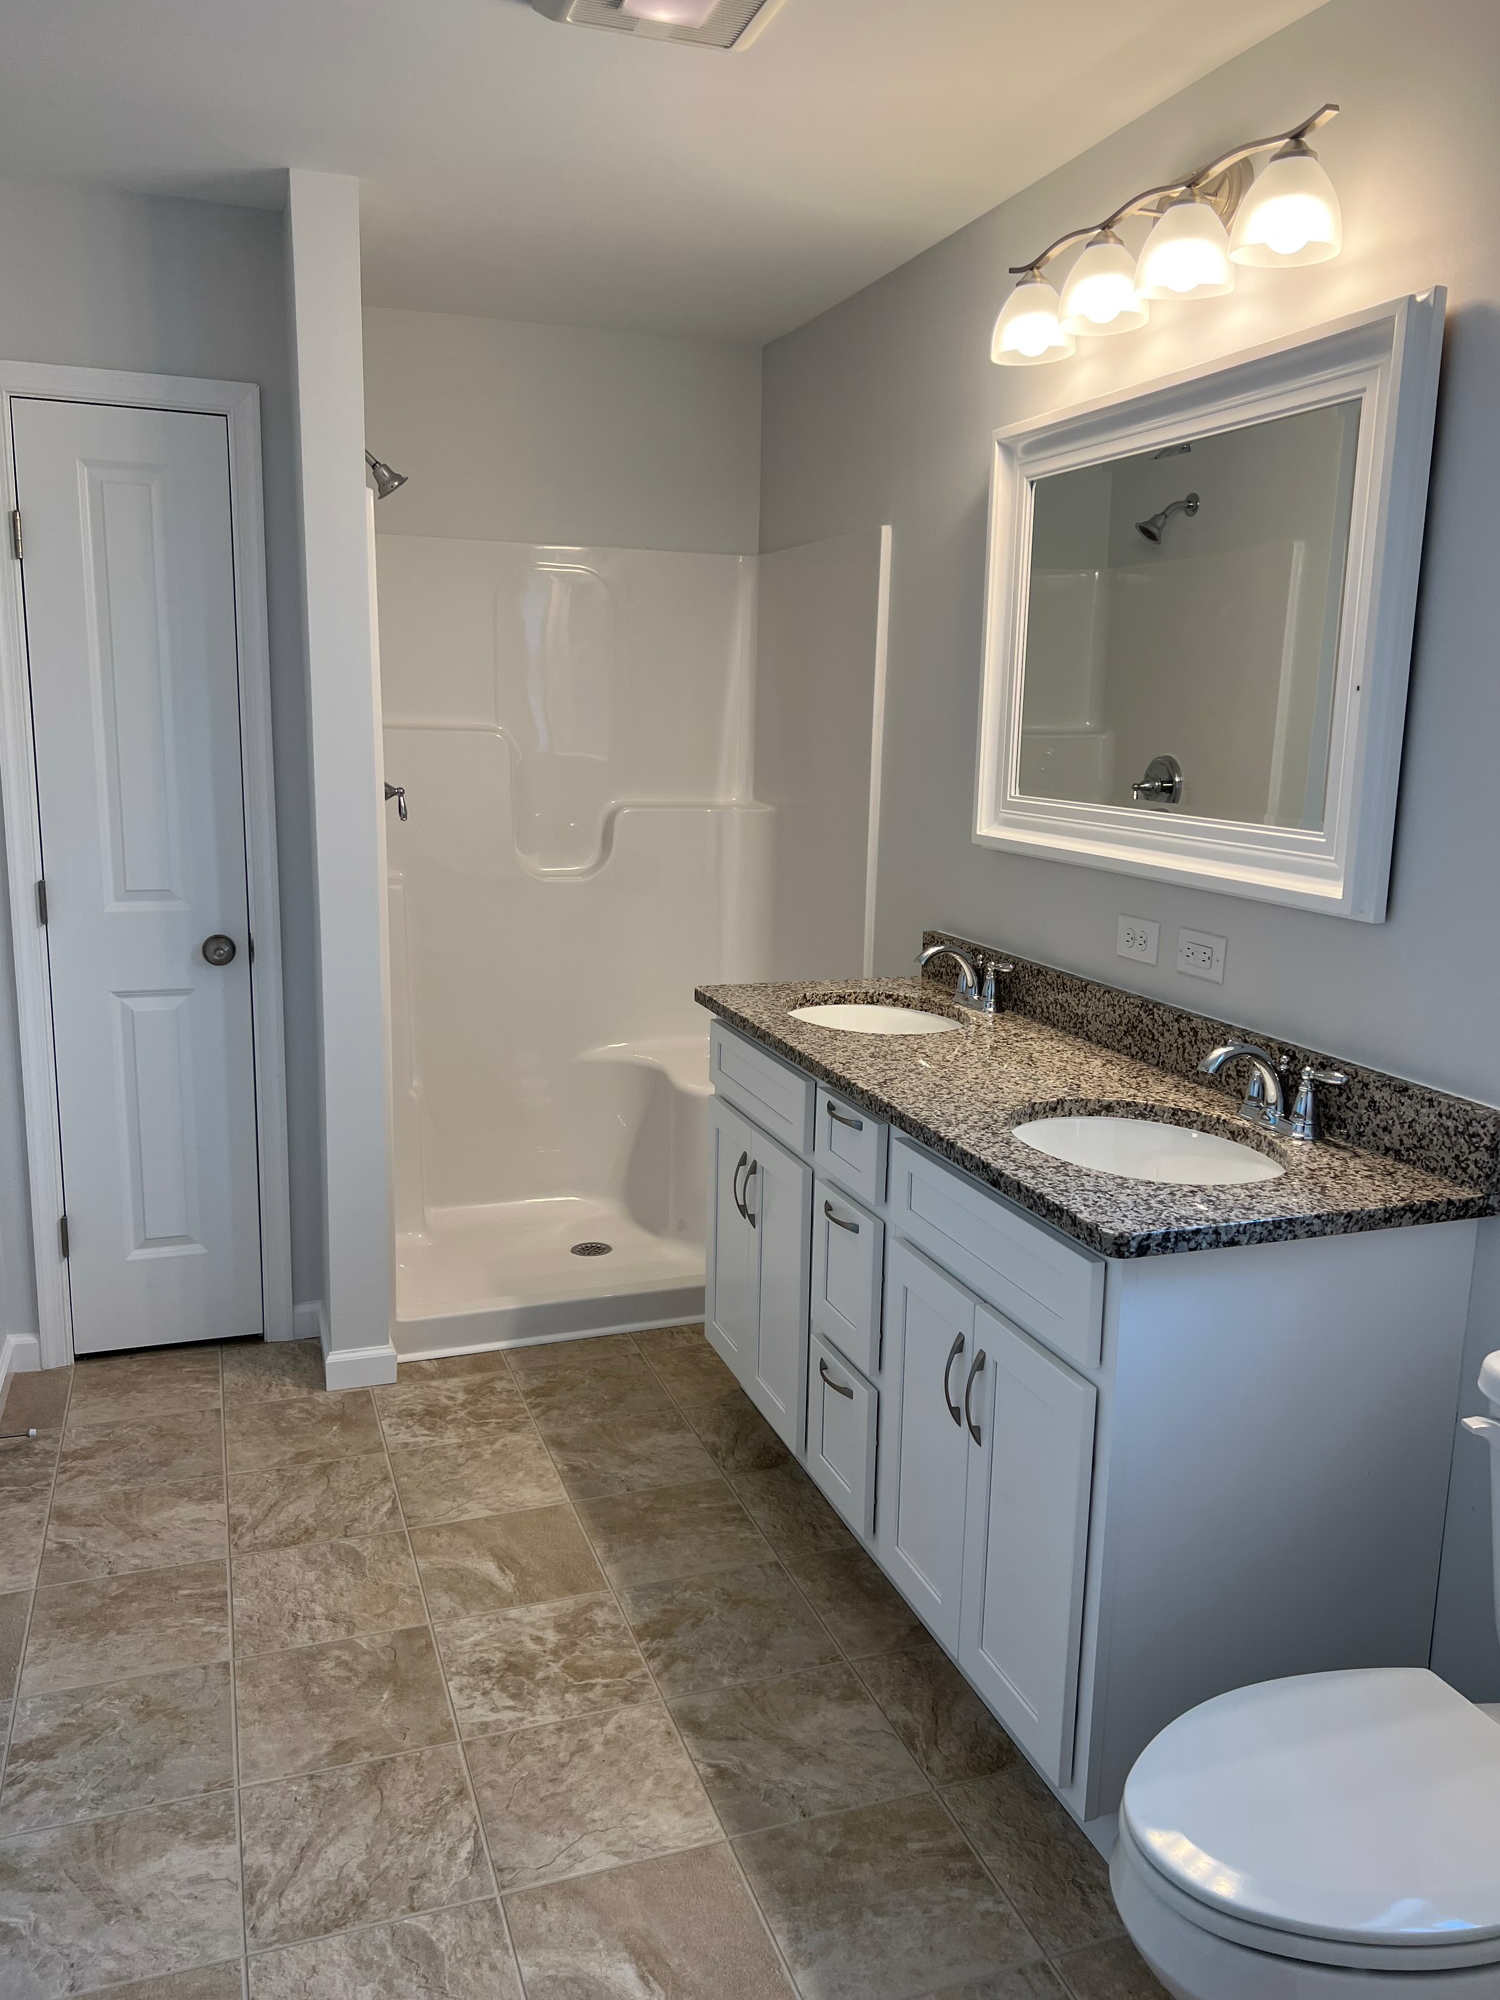 Bathroom, new single-story Birch home in southern Delaware